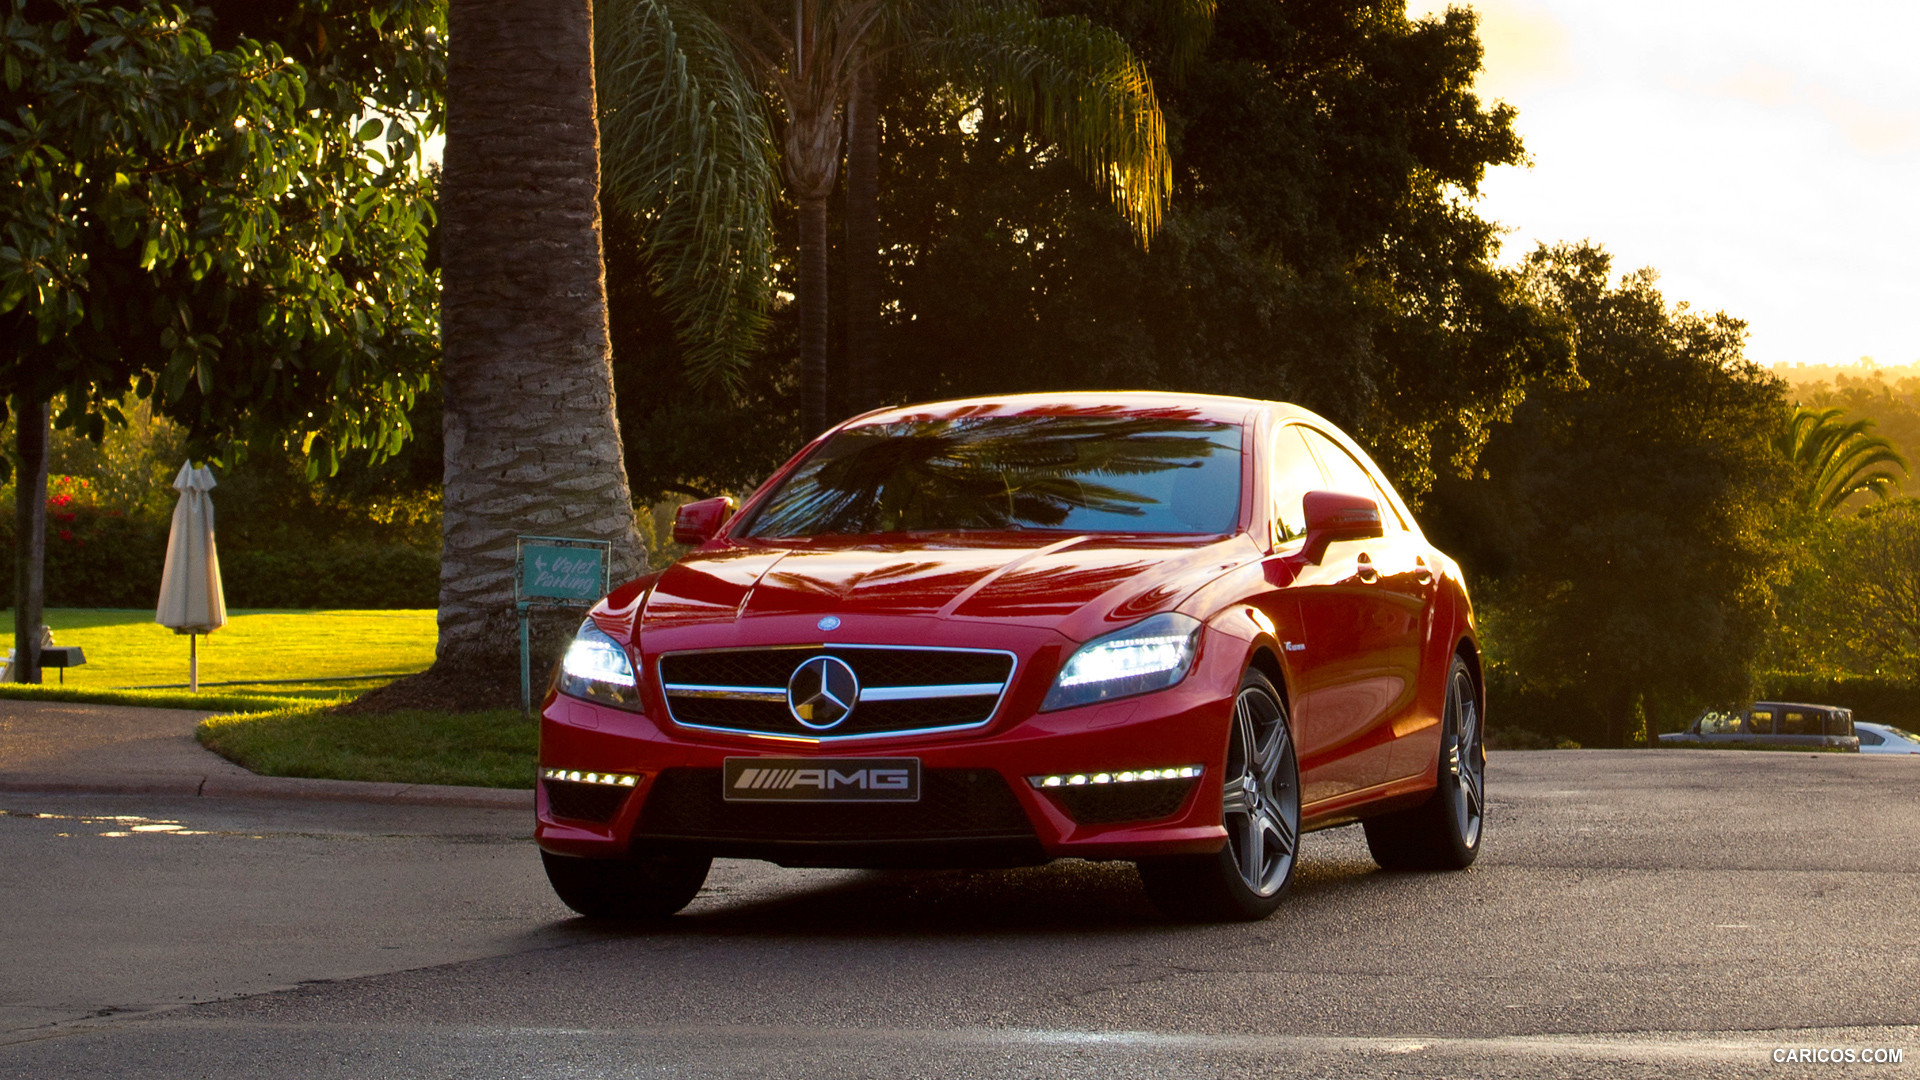 Mercedes-Benz CLS 63 AMG (2012)  - Front Angle , #21 of 85